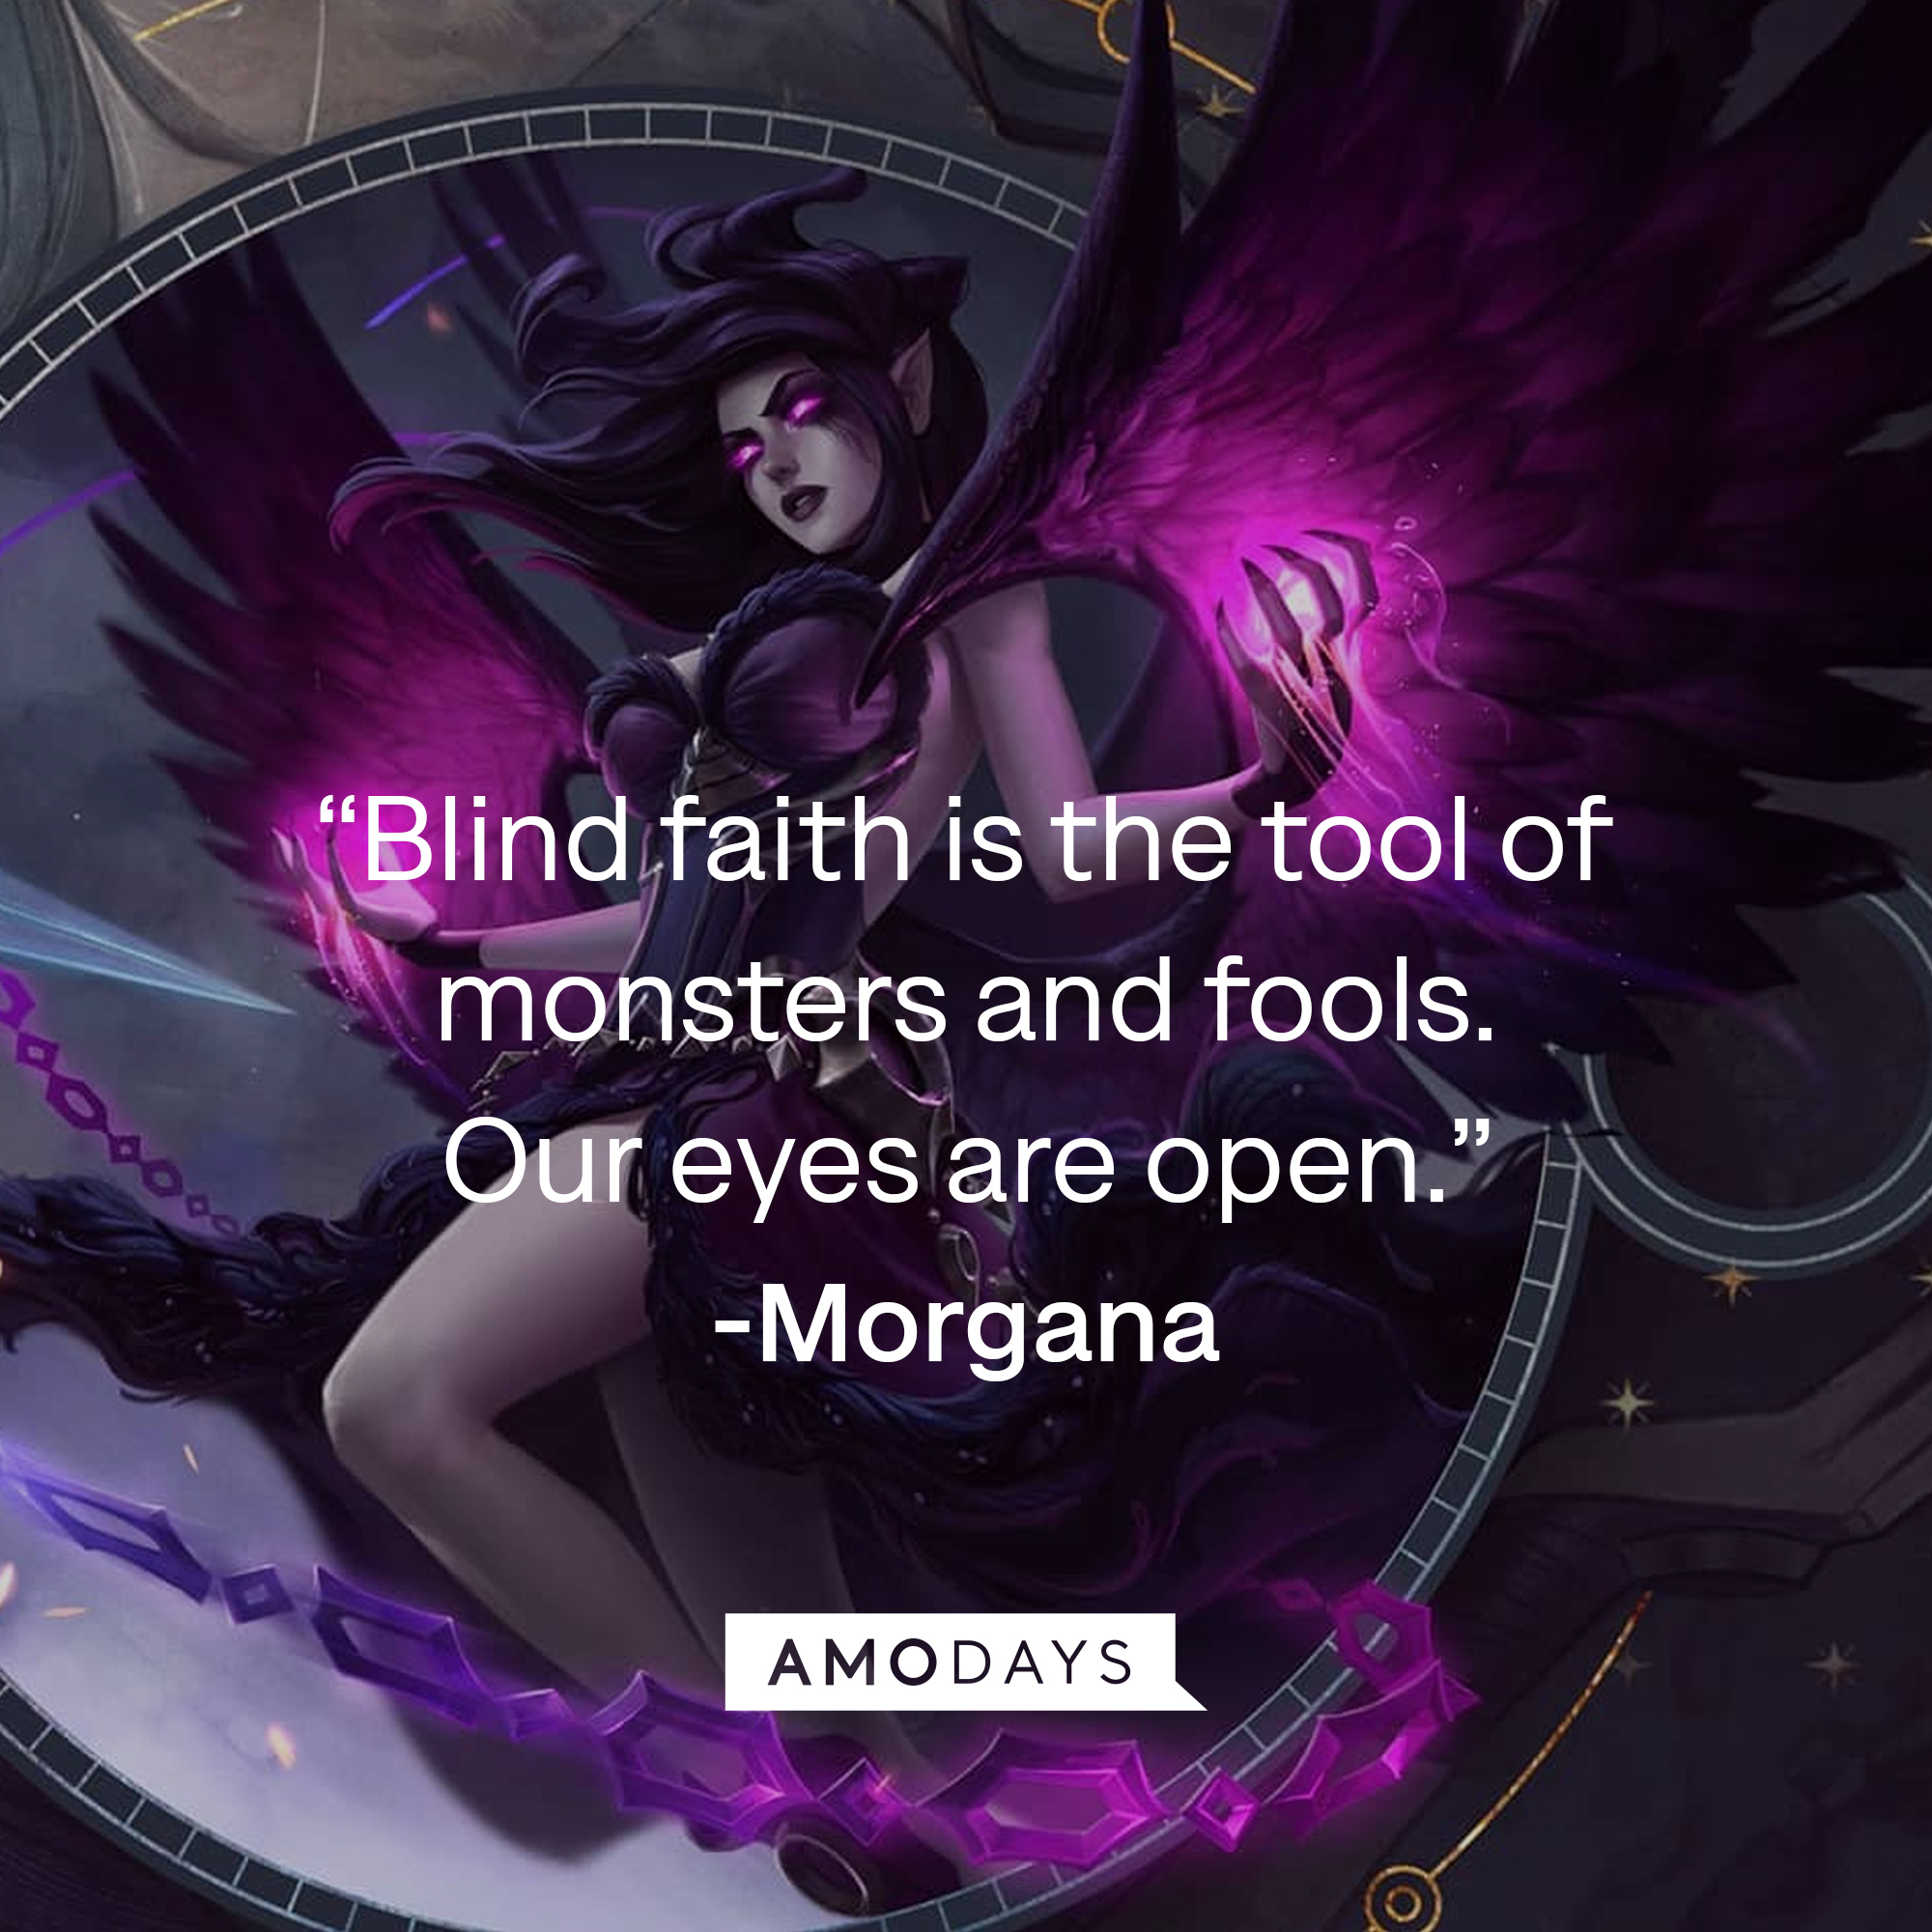 An image of Morgana, with her quote: “Blind faith is the tool of monsters and fools. Our eyes are open.” | Source: Facebook.com/leagueoflegends